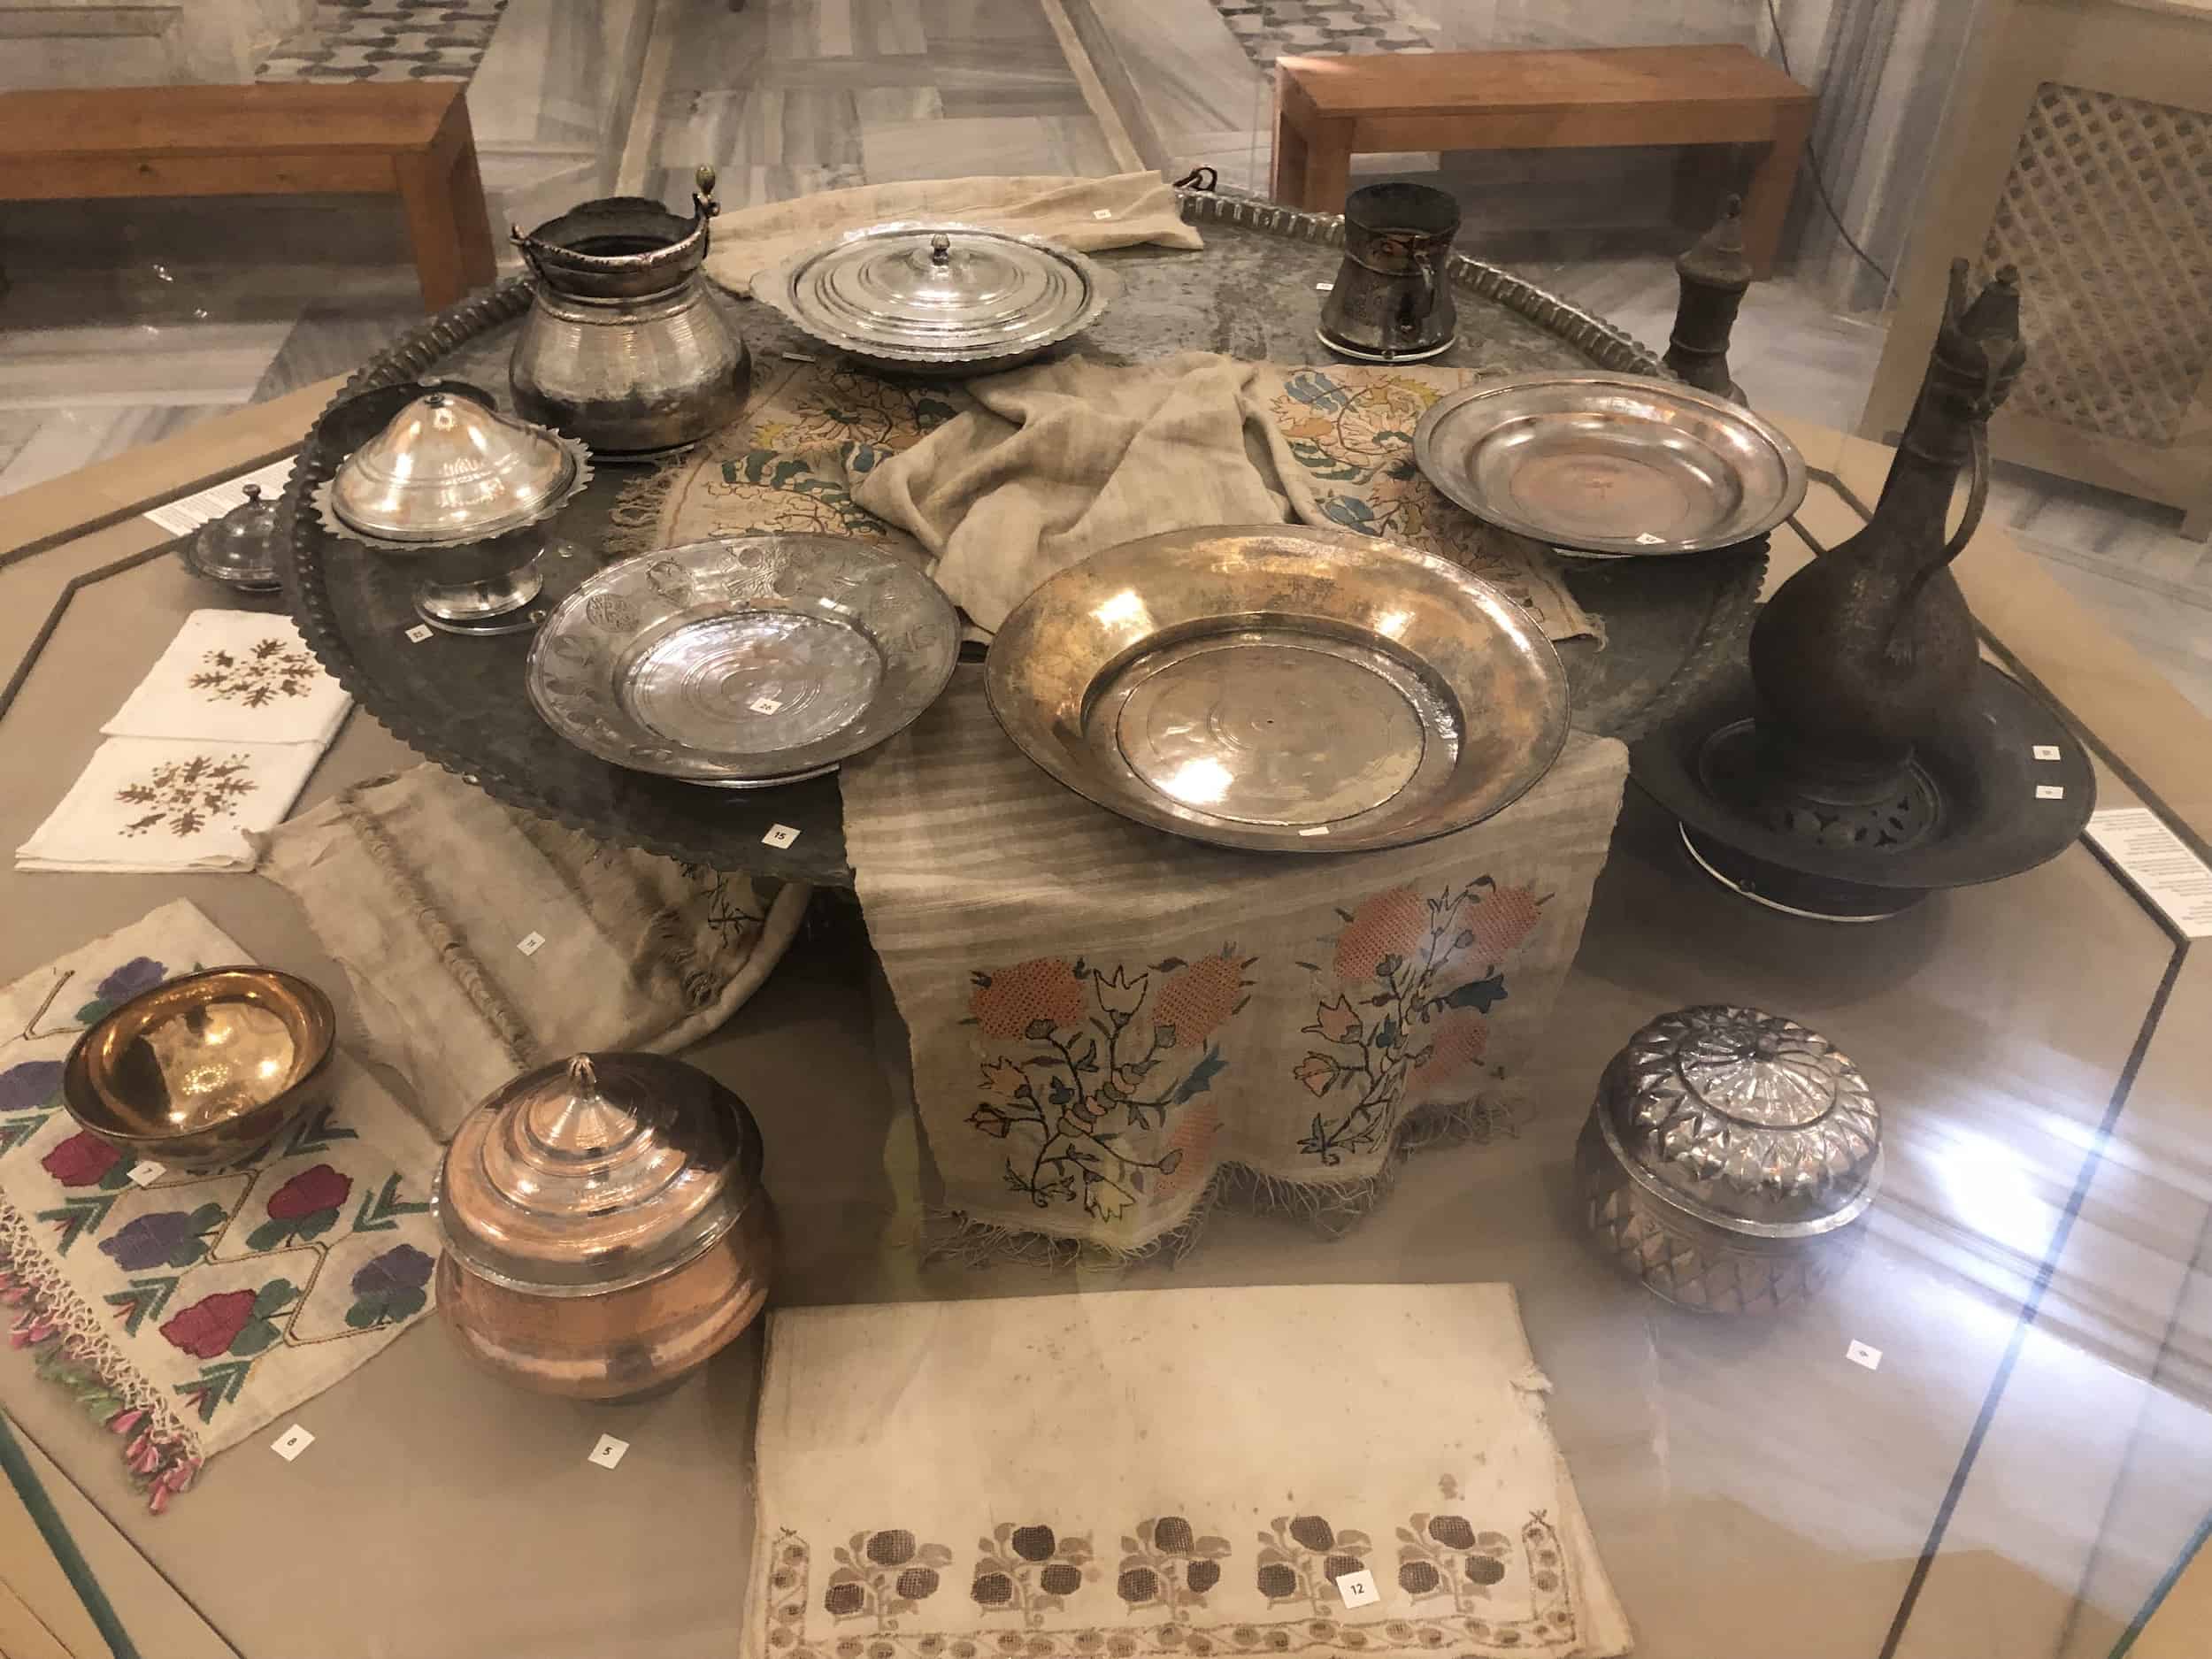 Bowls and plates in the men's hot room at the Bayezid II Hamam